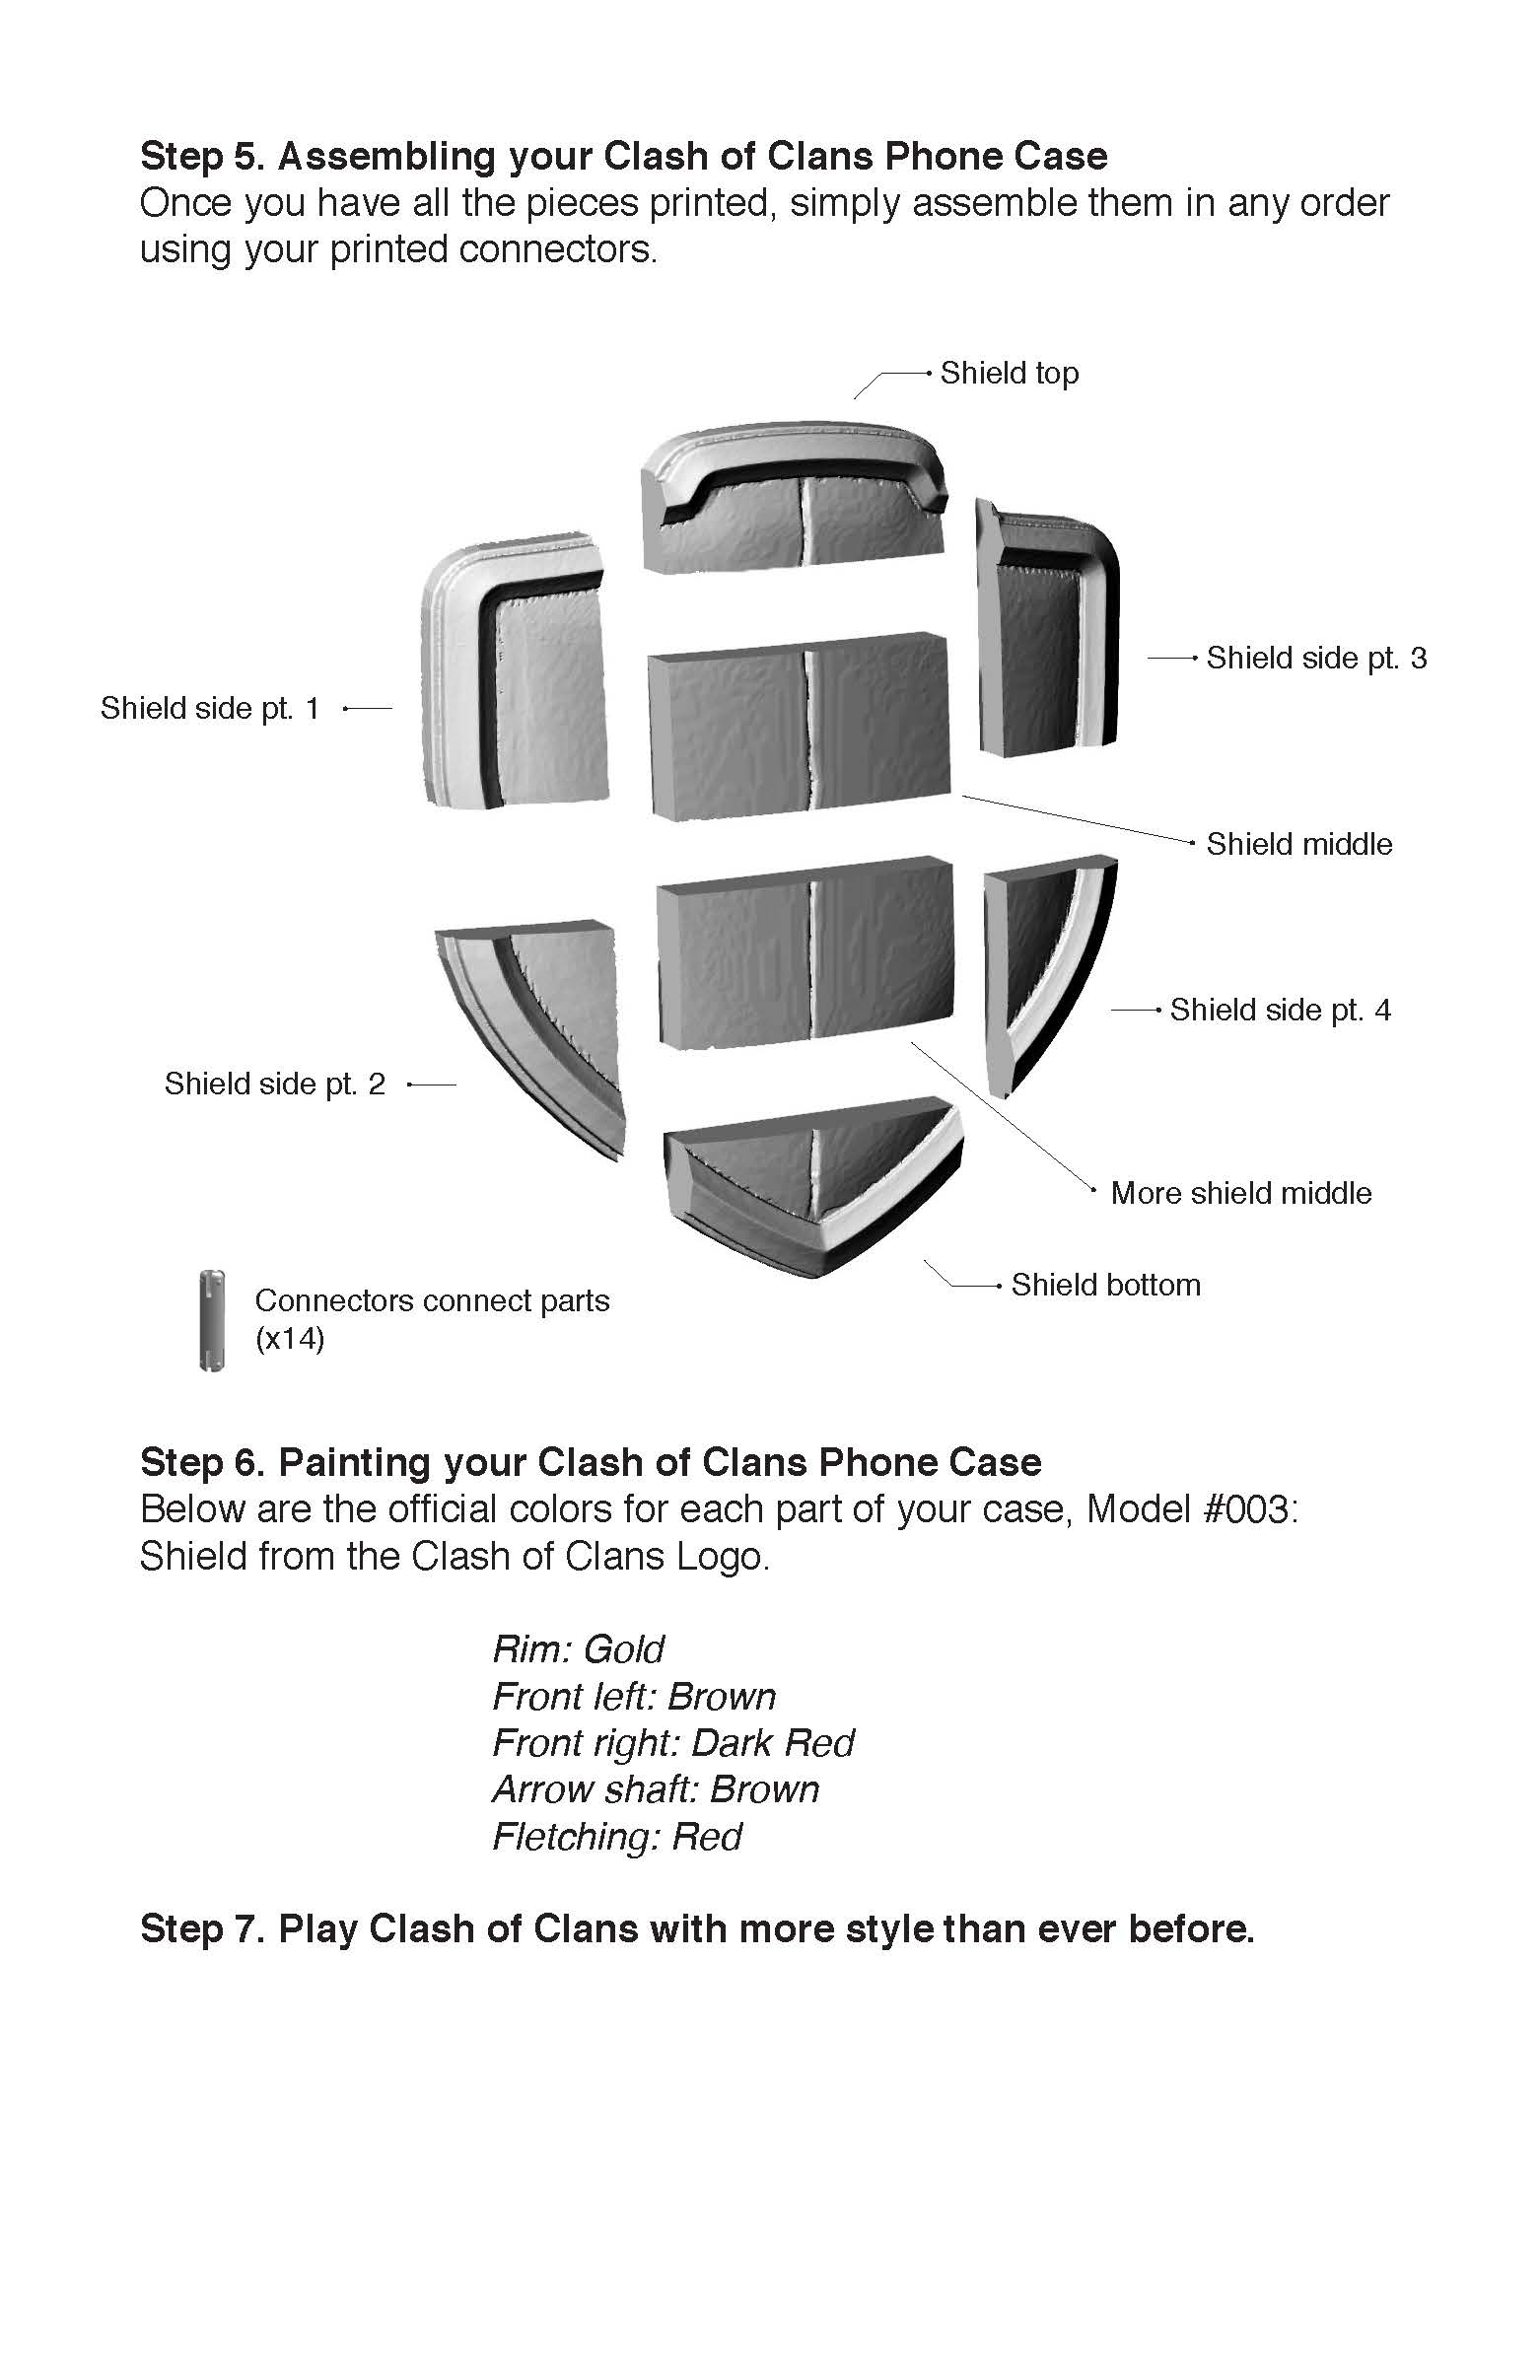 Clash-of-Clans-Phone-Cases-Instruction-Manual-Model-003-Shield-from-the-Clash-of-Clans-Logo_Page_3.jpg